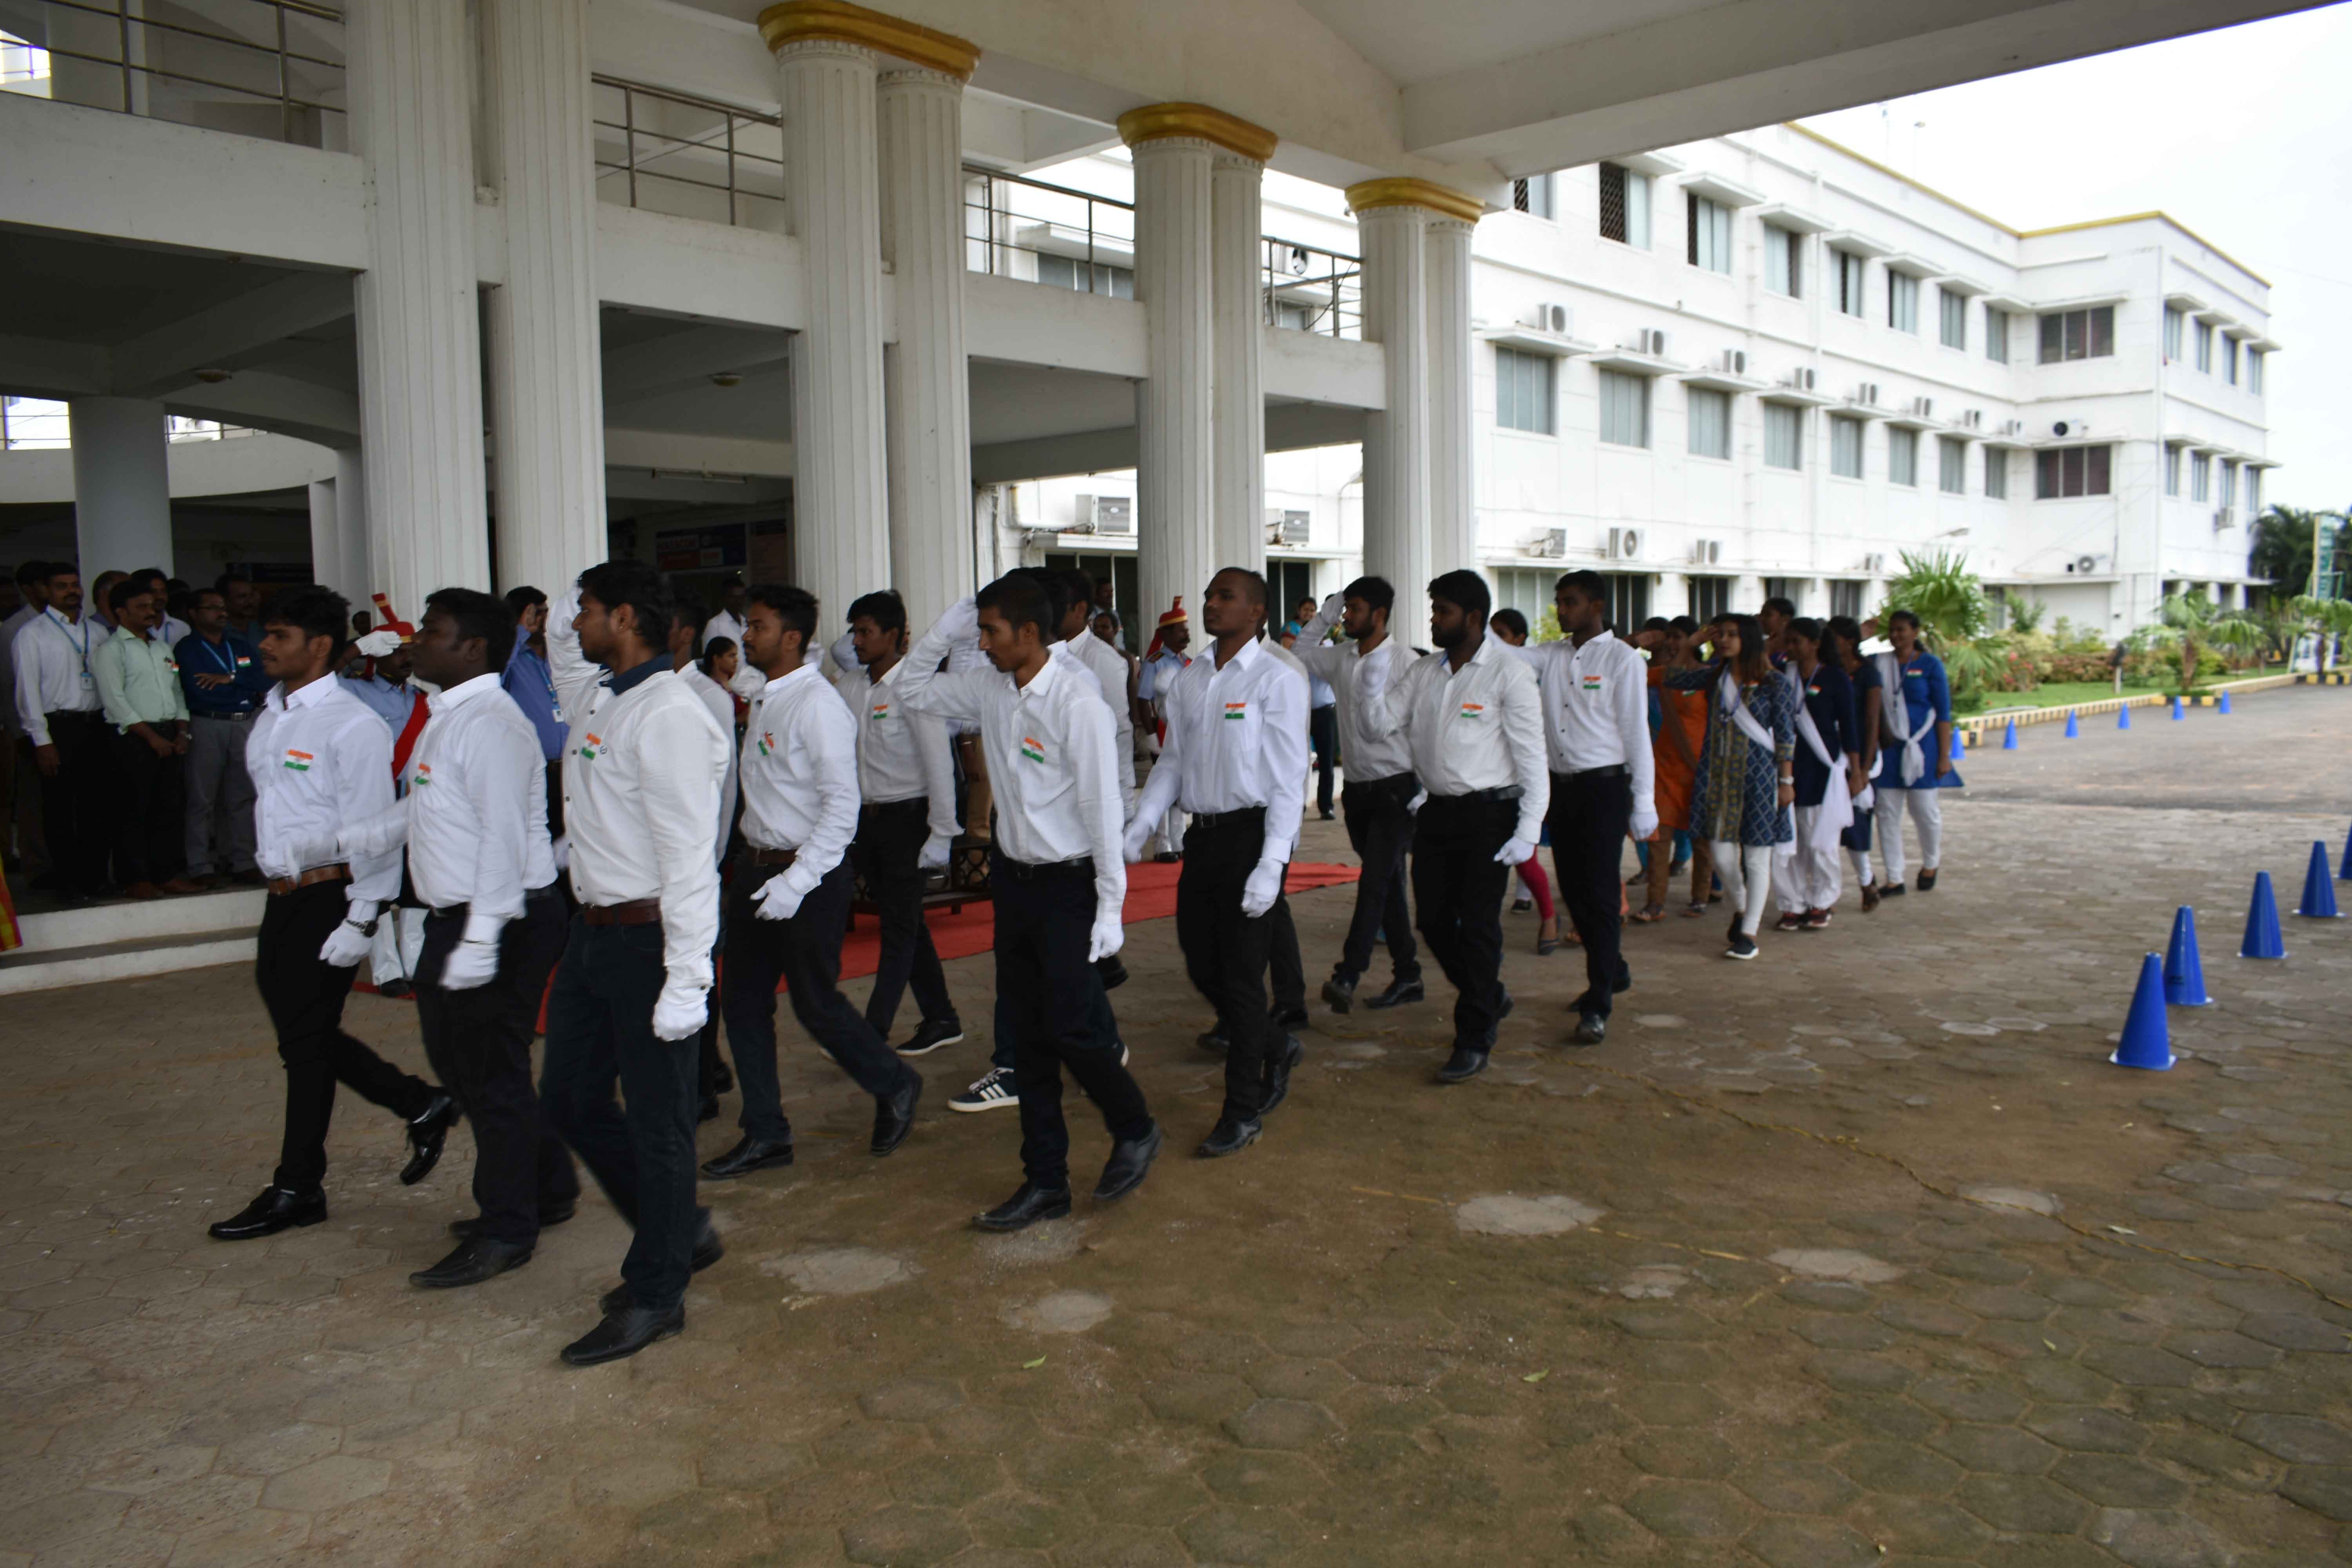 Parade by AVIT students during Independence Day Celebration 2018
